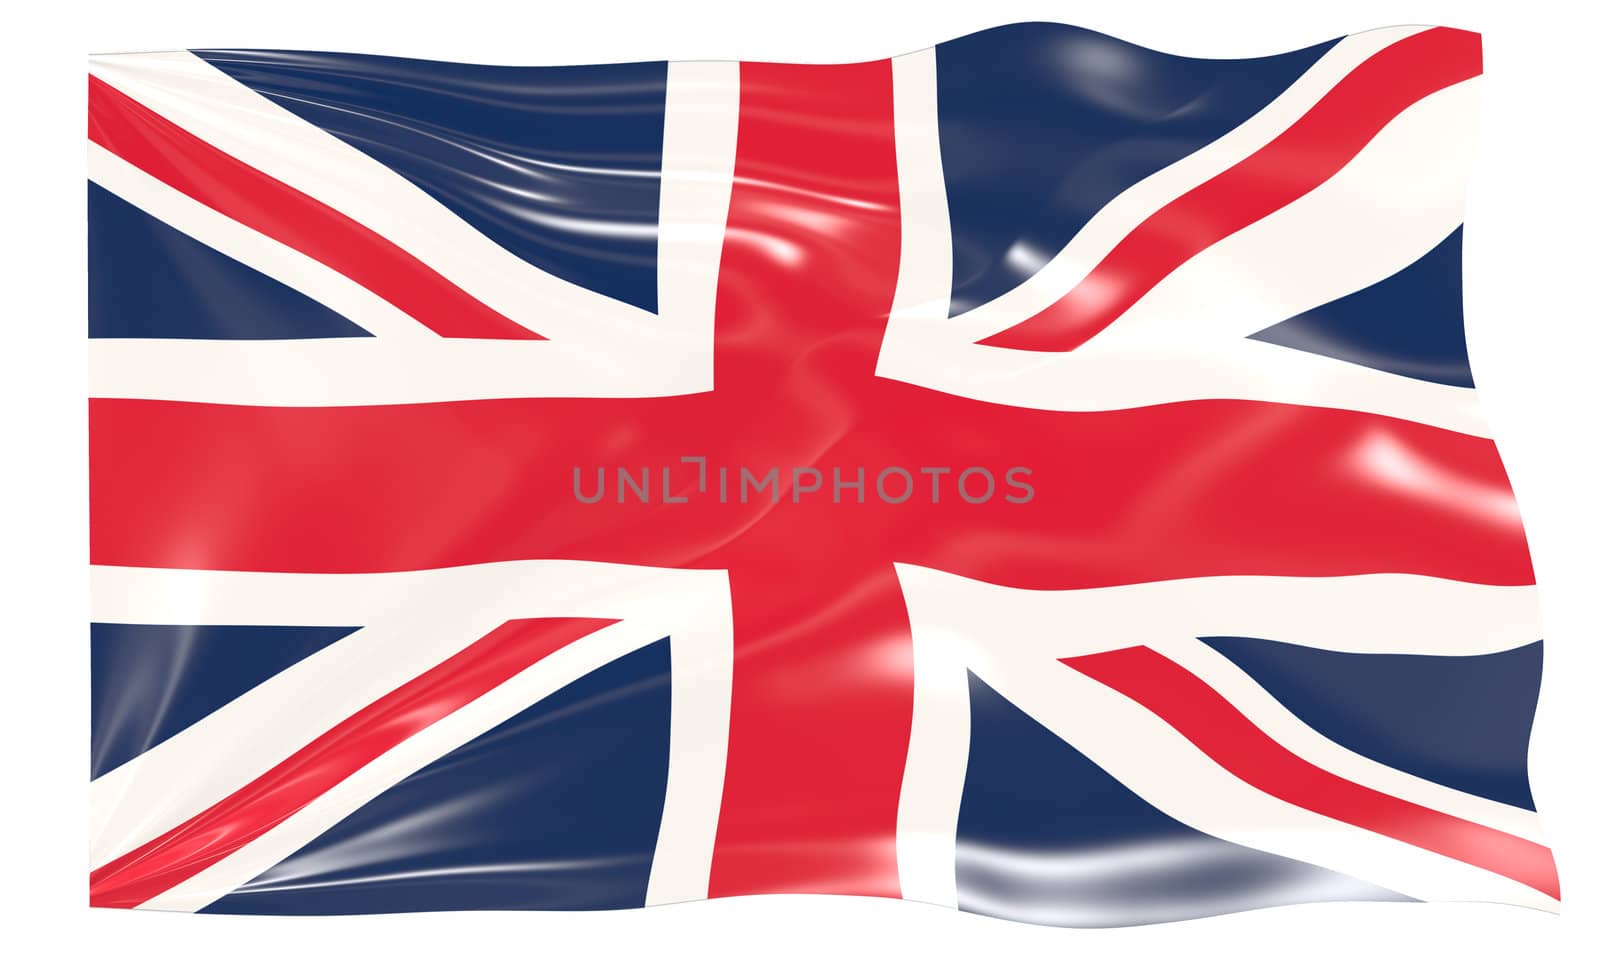 Great Image of the Flag of the united Kingdom